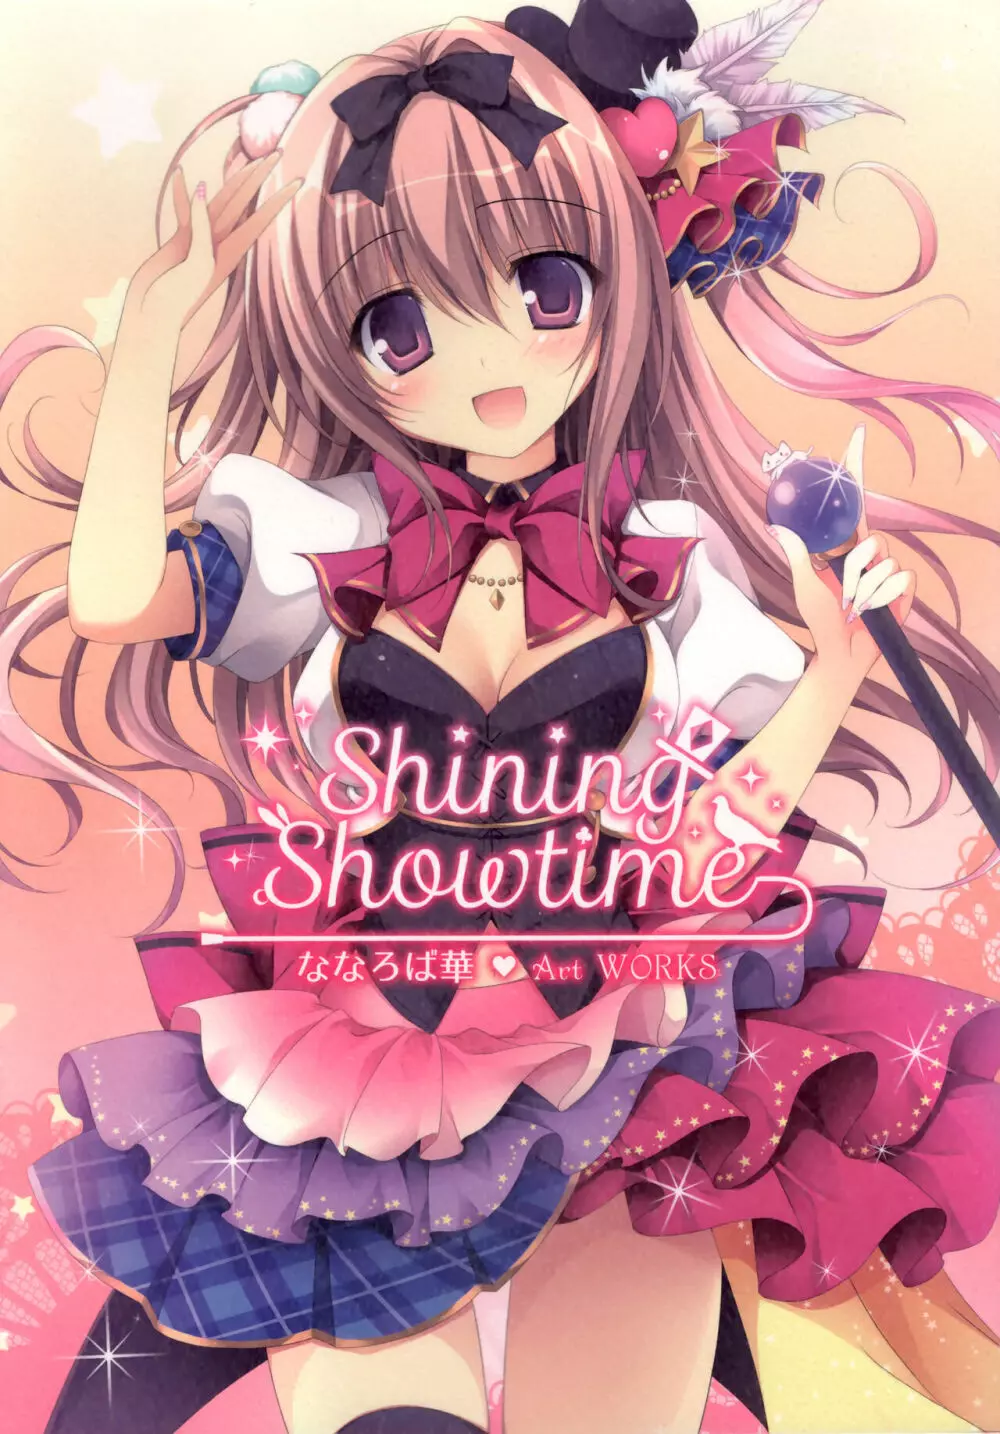 Shining Showtime ななろば華 Art WORKS Page.1